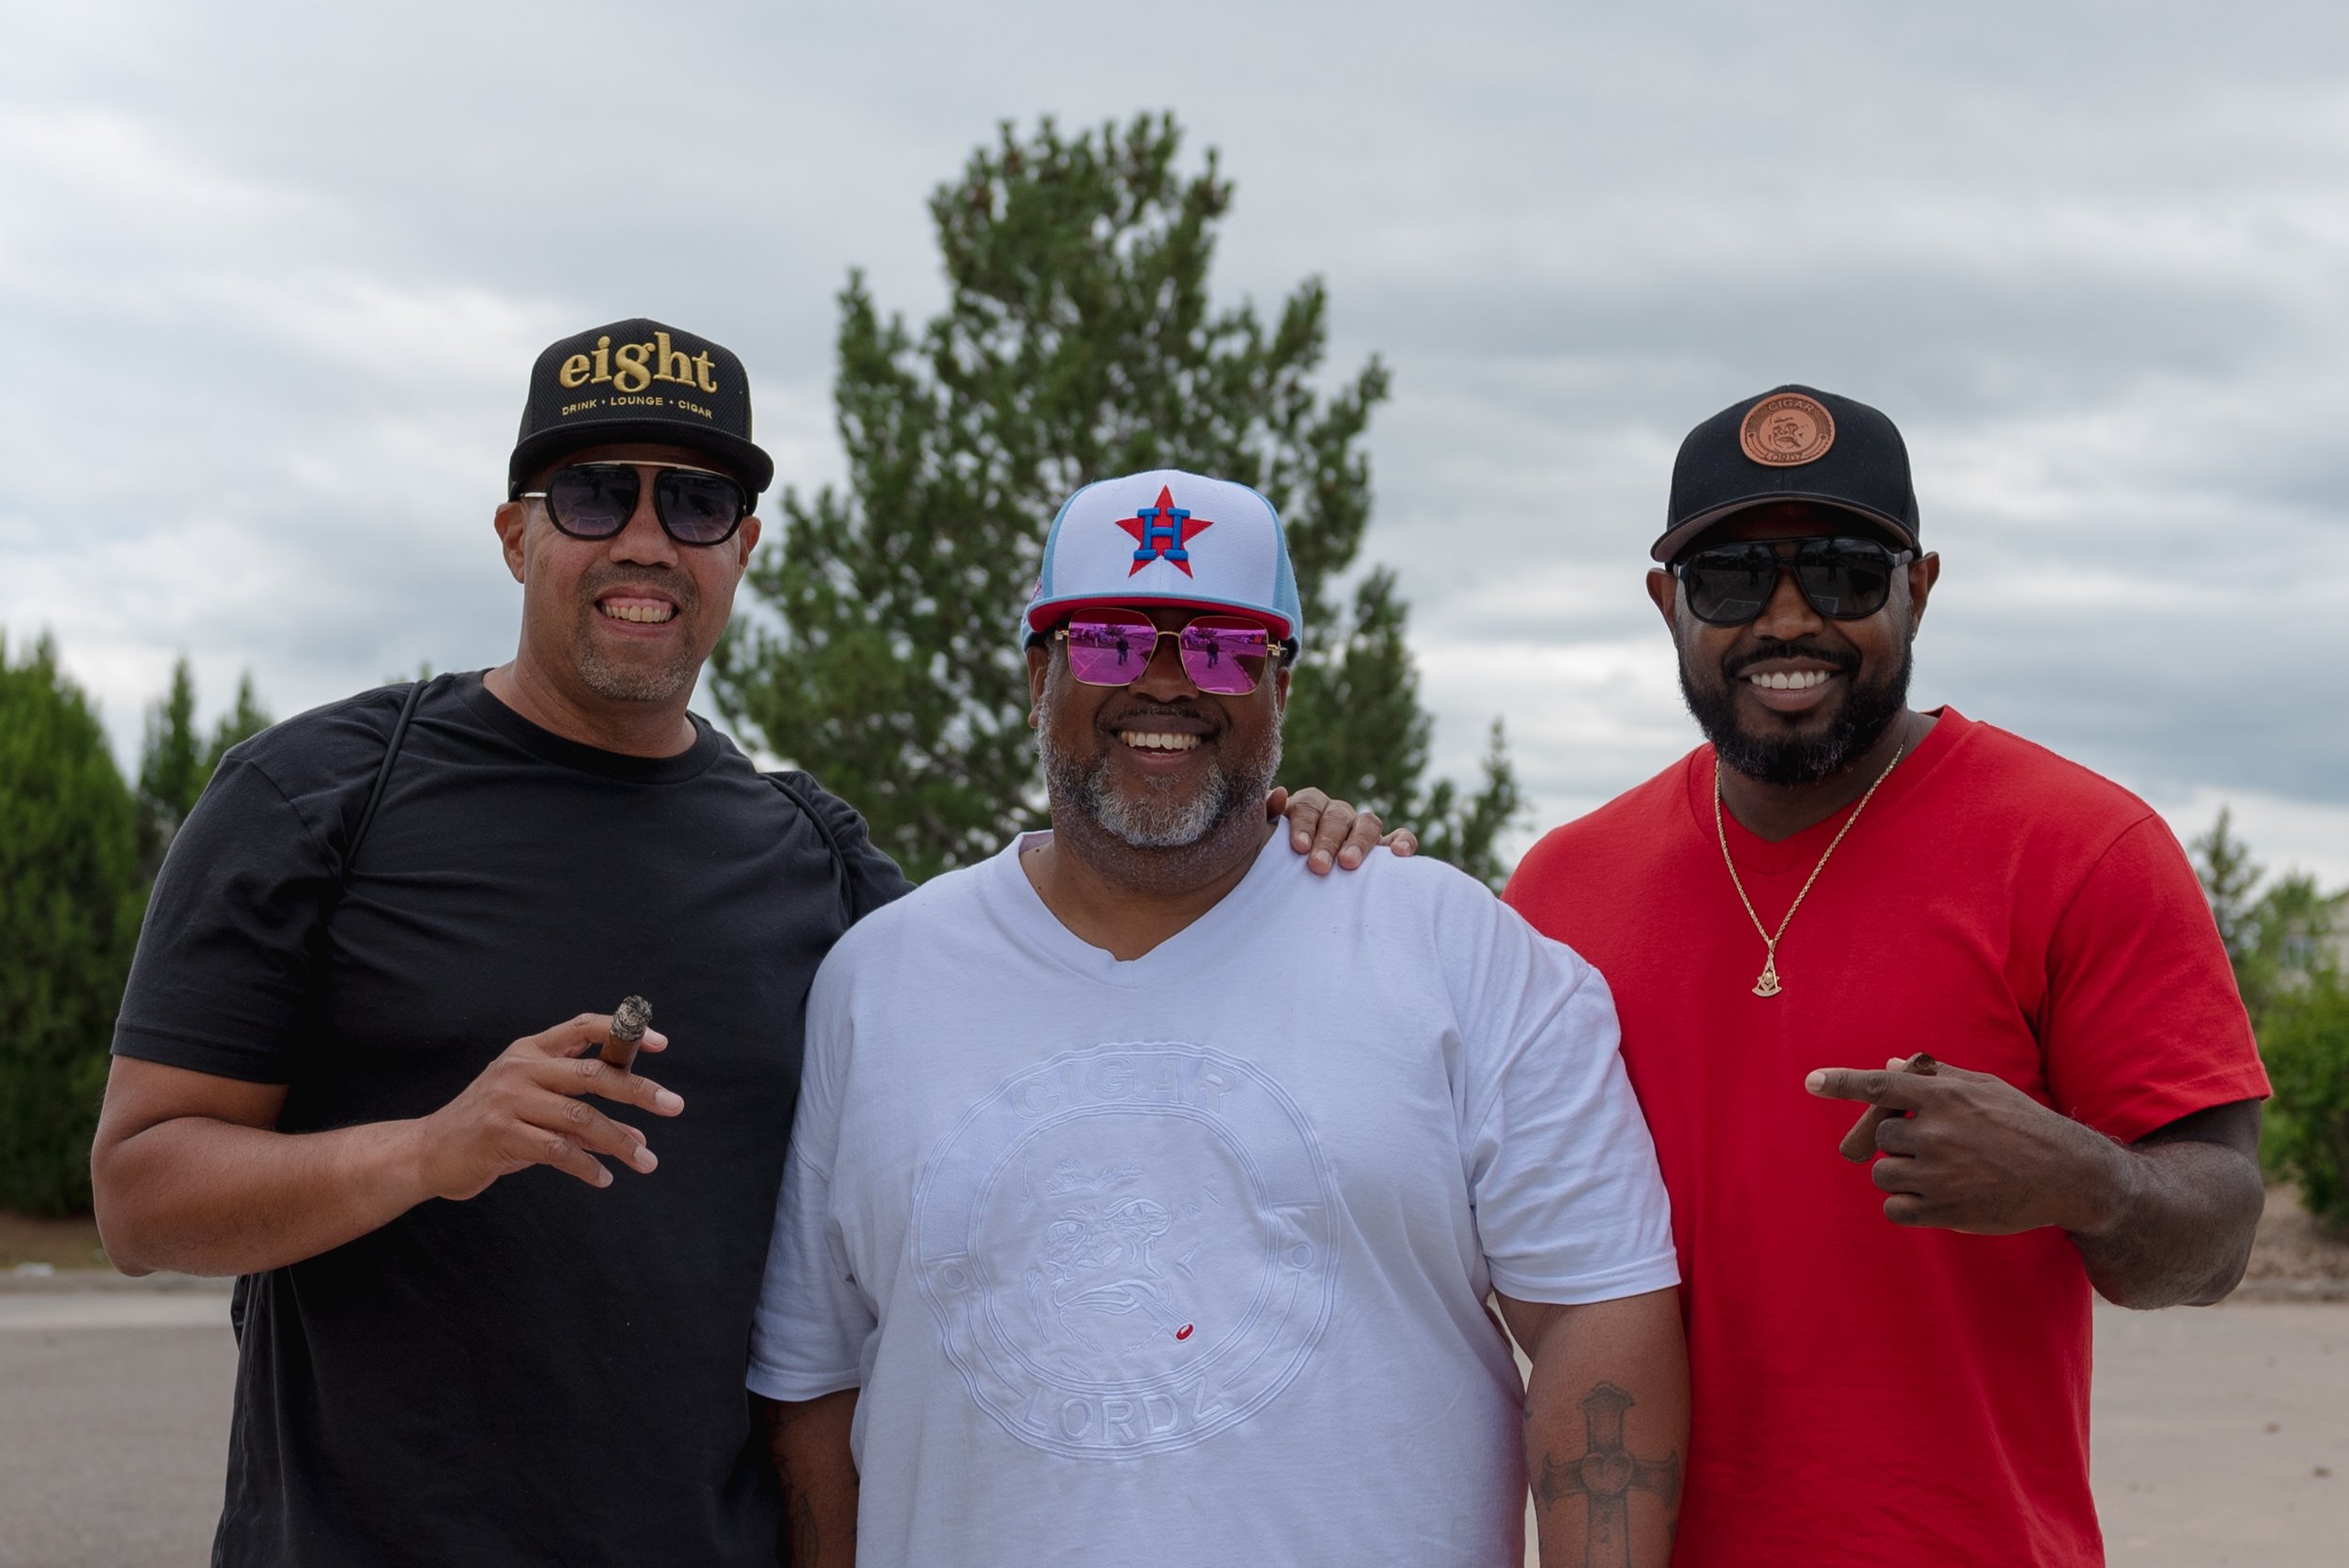  Photo: Adrian Michael  CJ Johnson, President of Cigar Lordz (middle) poses with other members of the Cigar Lordz. 